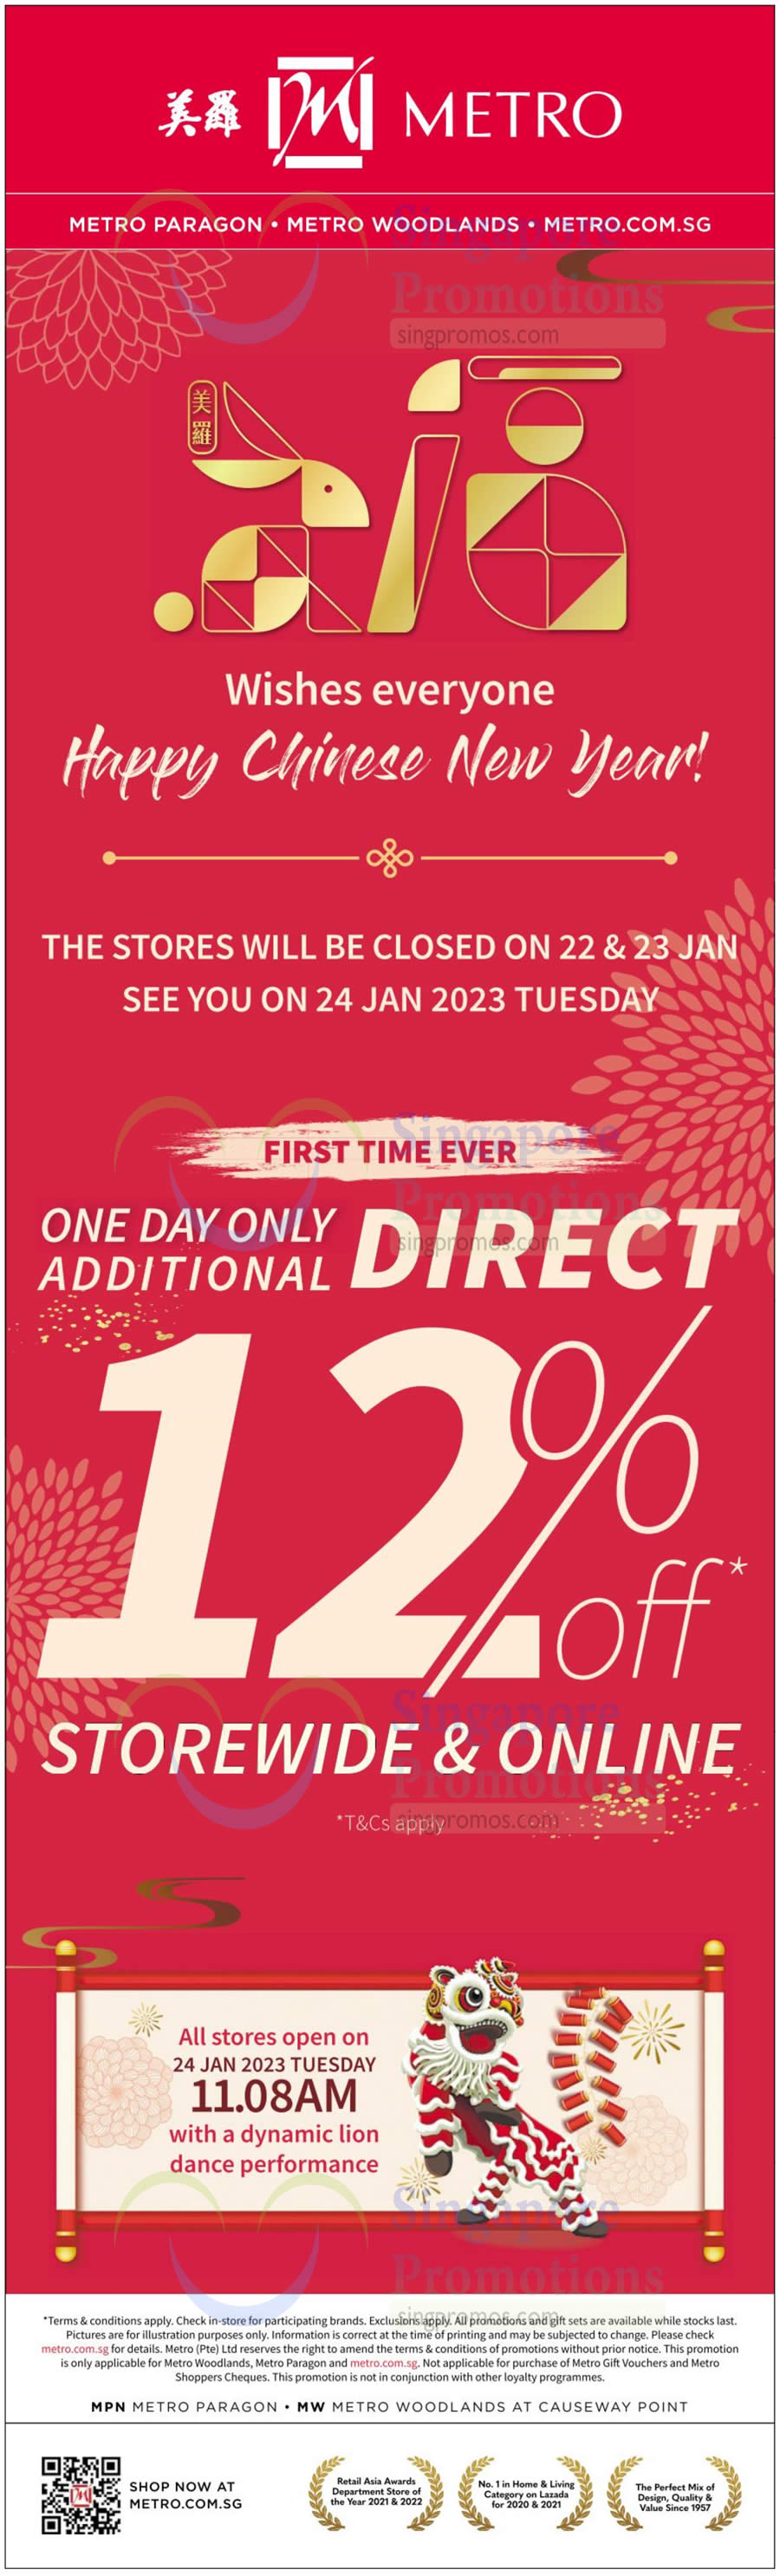 Lobang: Metro offering 12% off storewide for one-day only on Tuesday, 24 Jan 2023 - 11